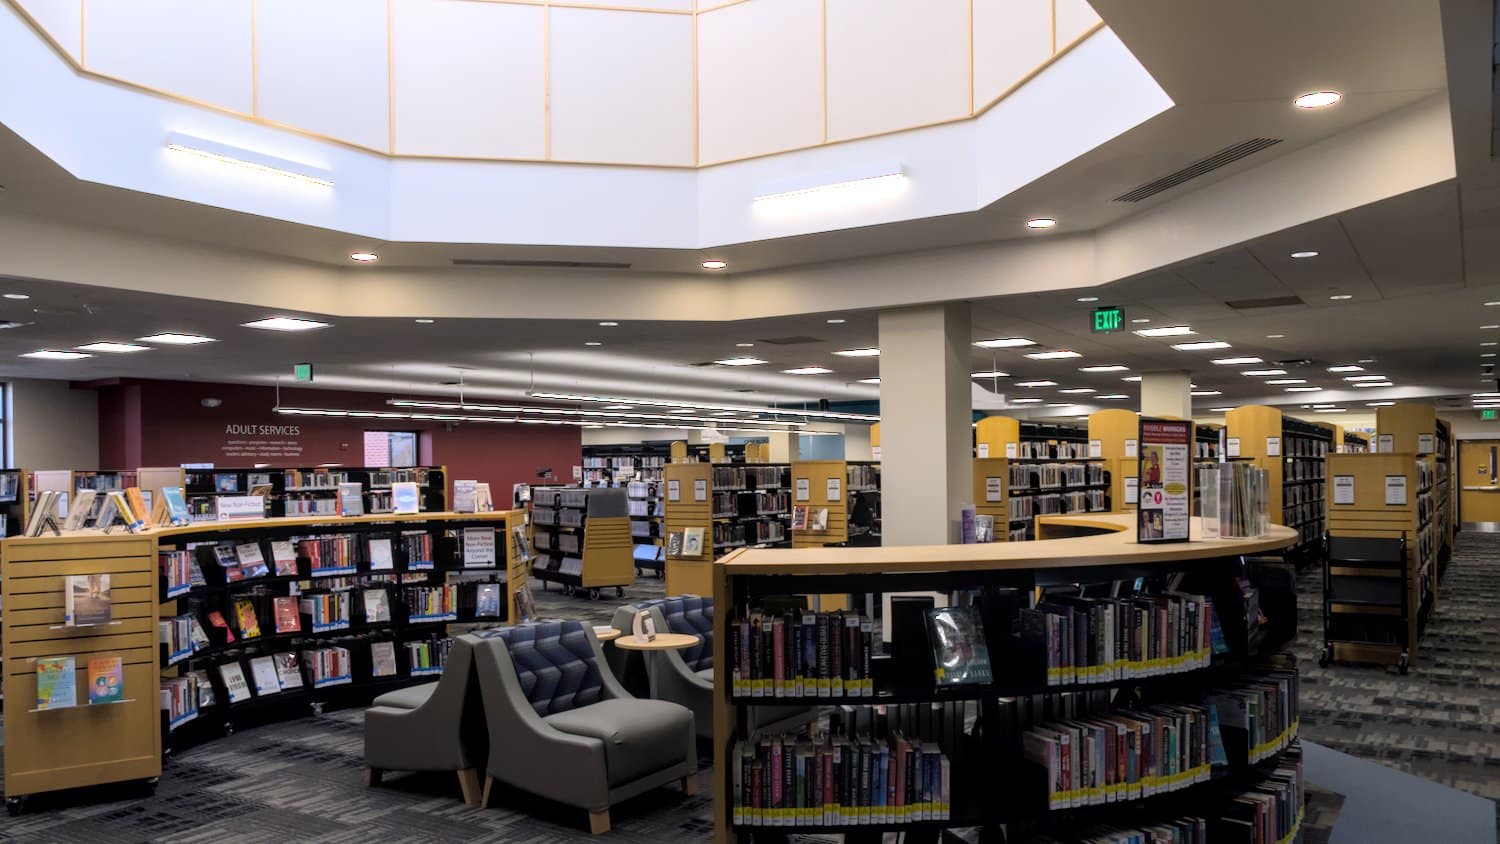 Library stacks and seating.